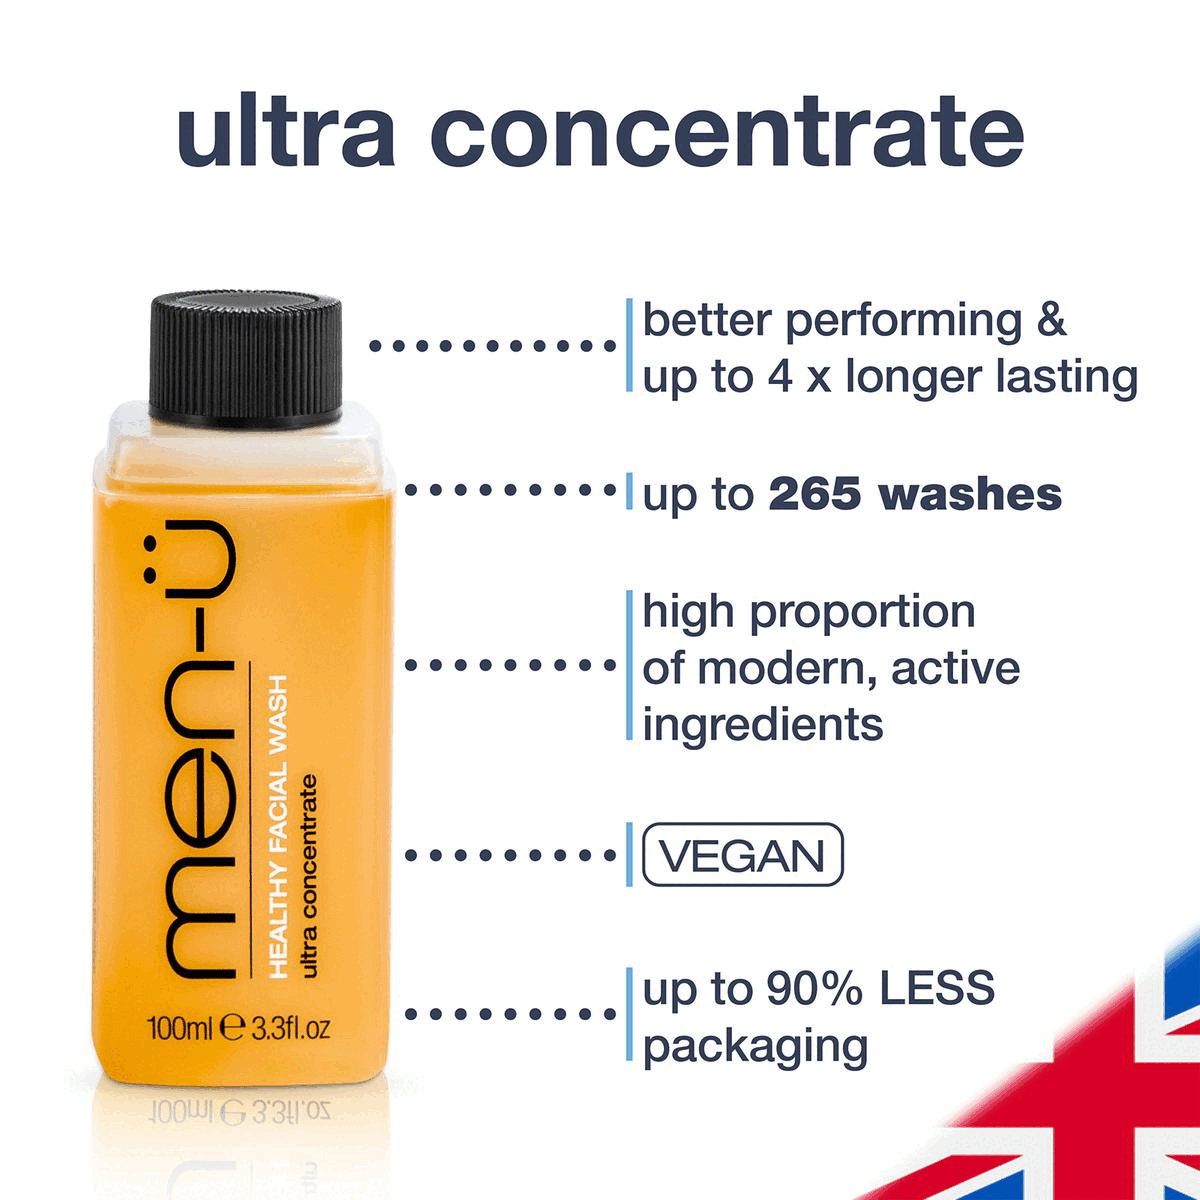 Ultra concentrate Benefits.More product benefits.Shave creme benefits.Directions on how to use